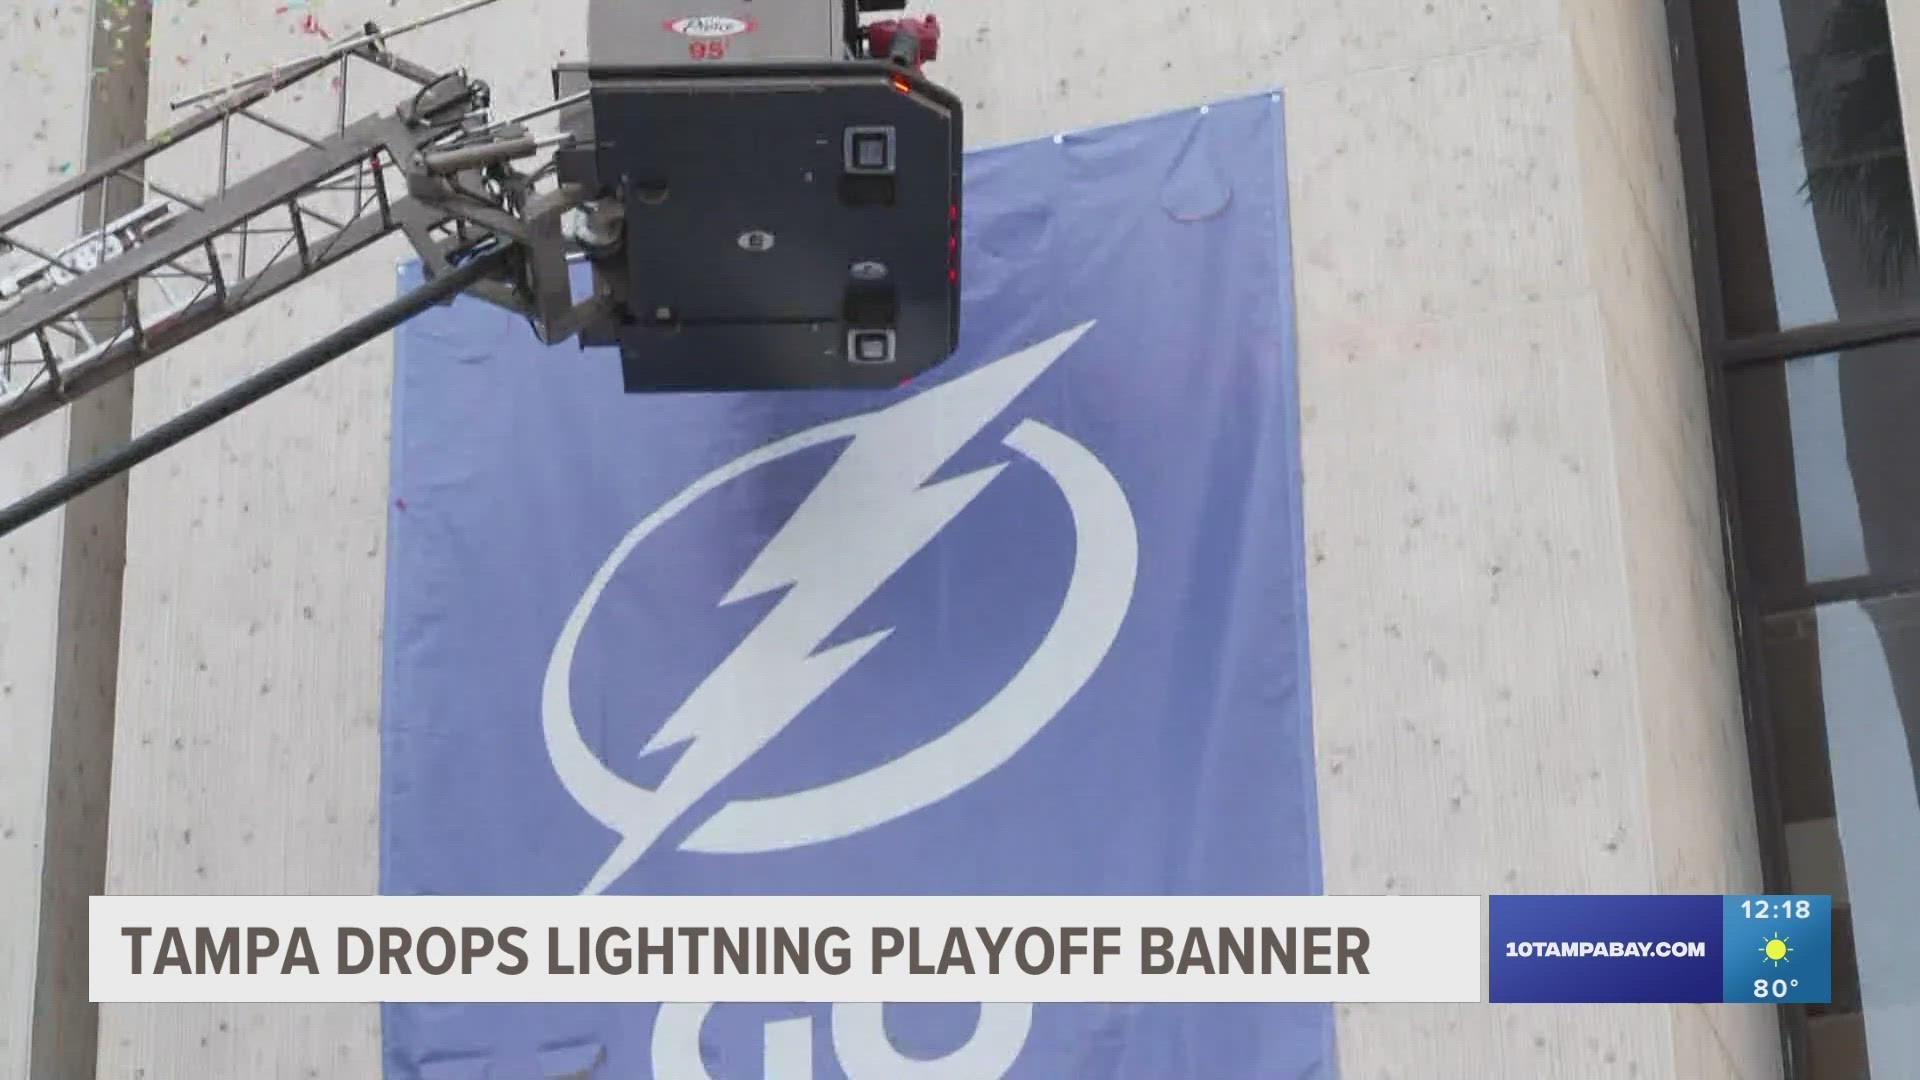 The Tampa Bay Lightning starts their playoff run against the Florida Panthers on Sunday.